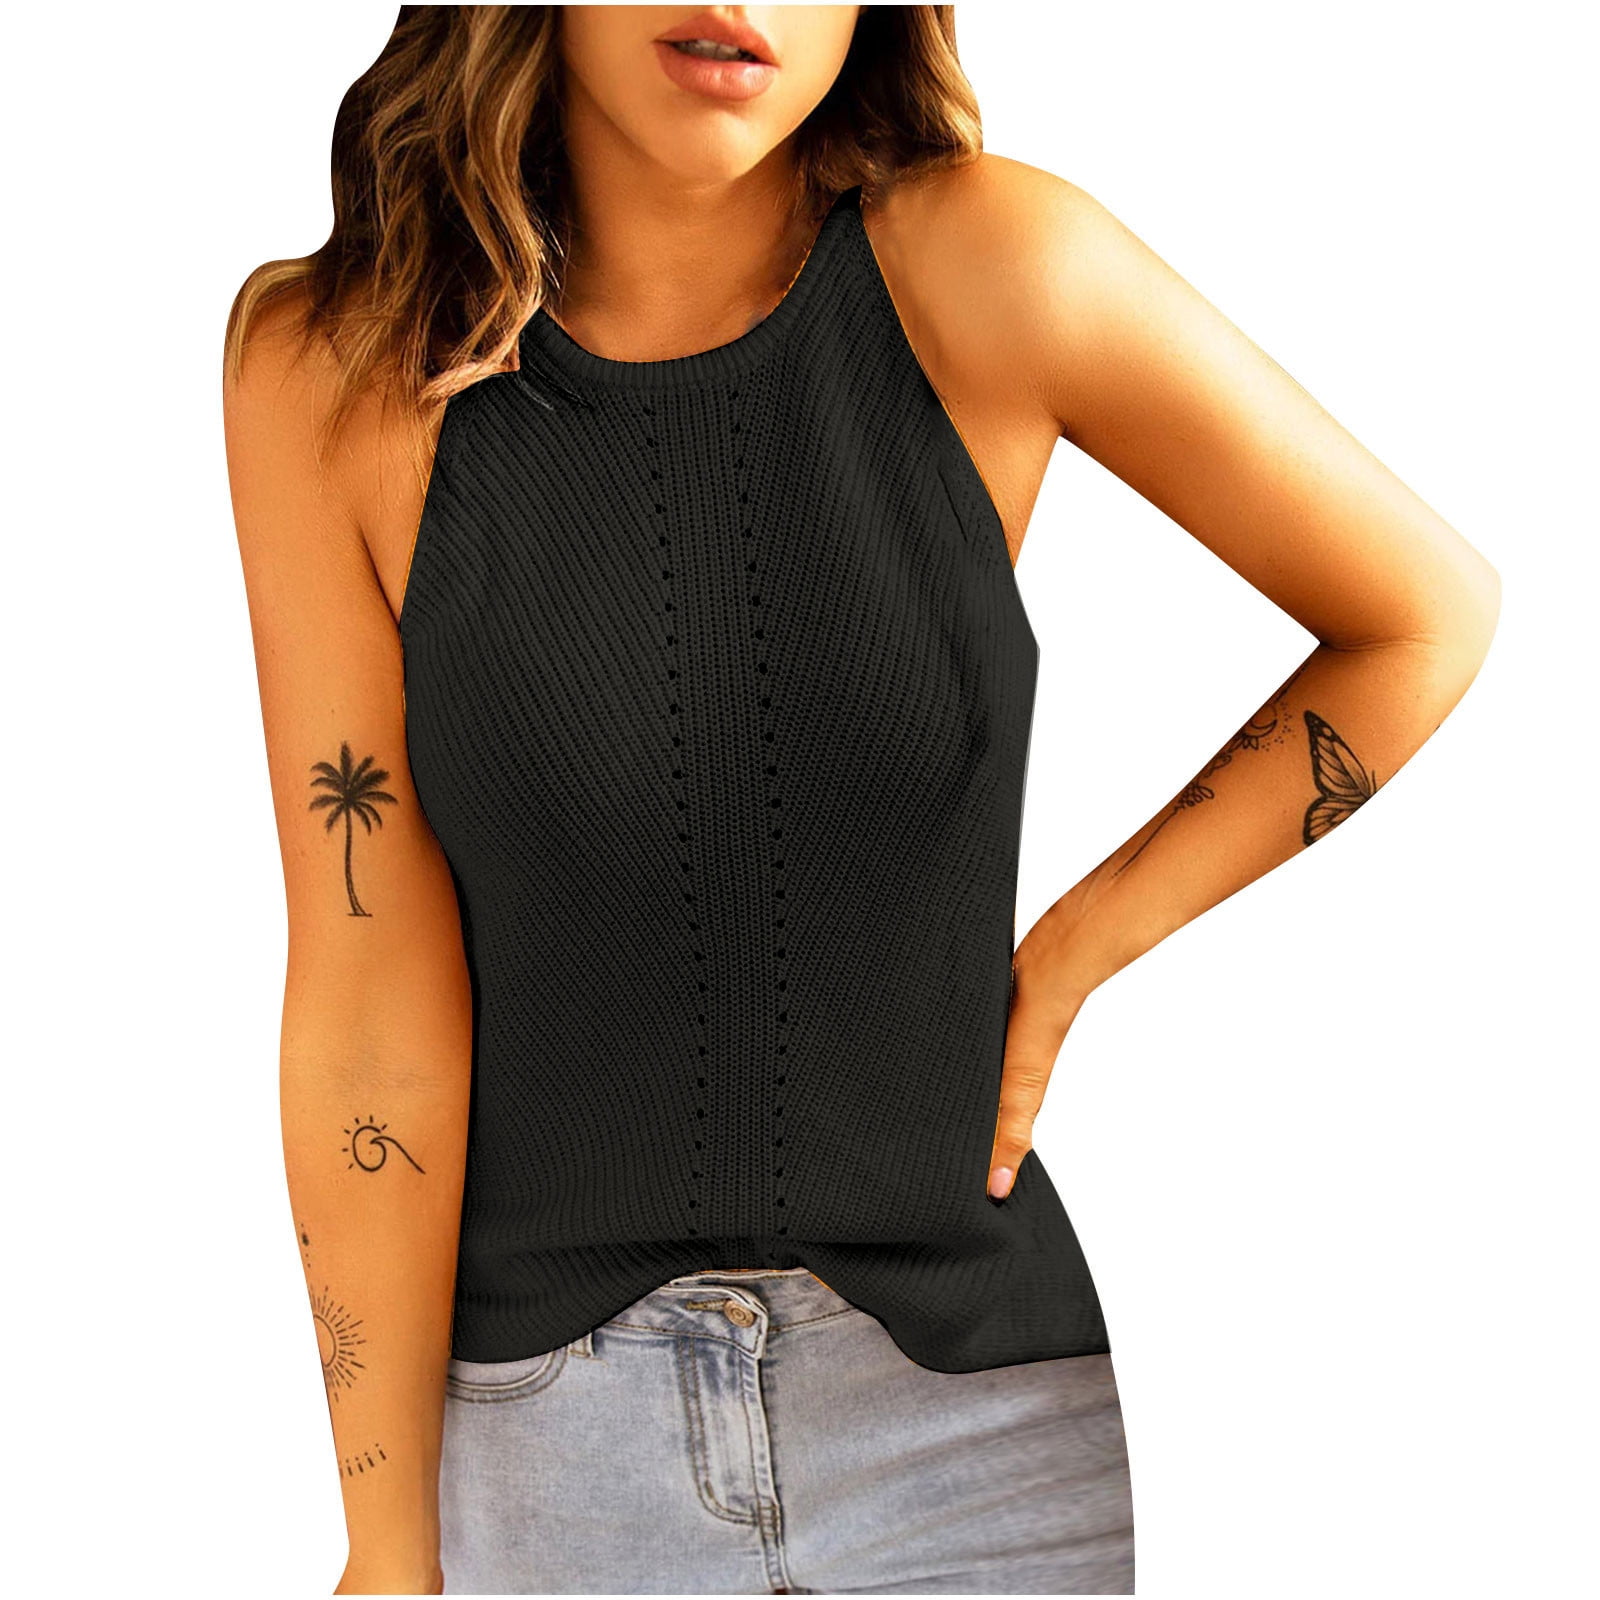 YYDGH Women's Knit Crop Top Ribbed Sleeveless Halter Neck Vest